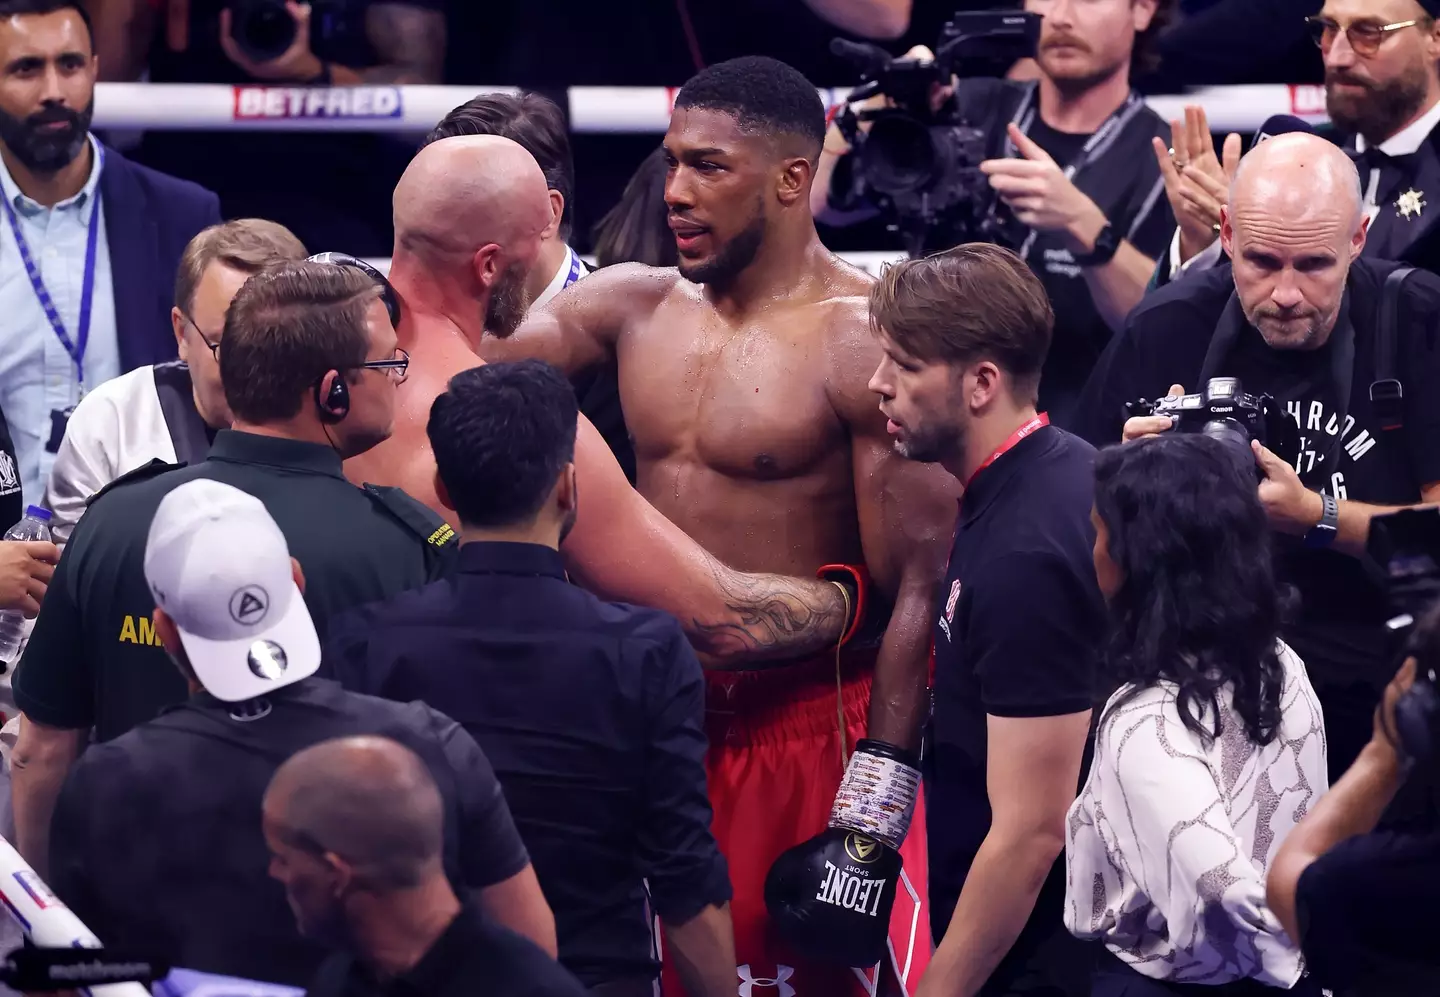 Joshua emerged victorious and made some questionable comments post-fight. (